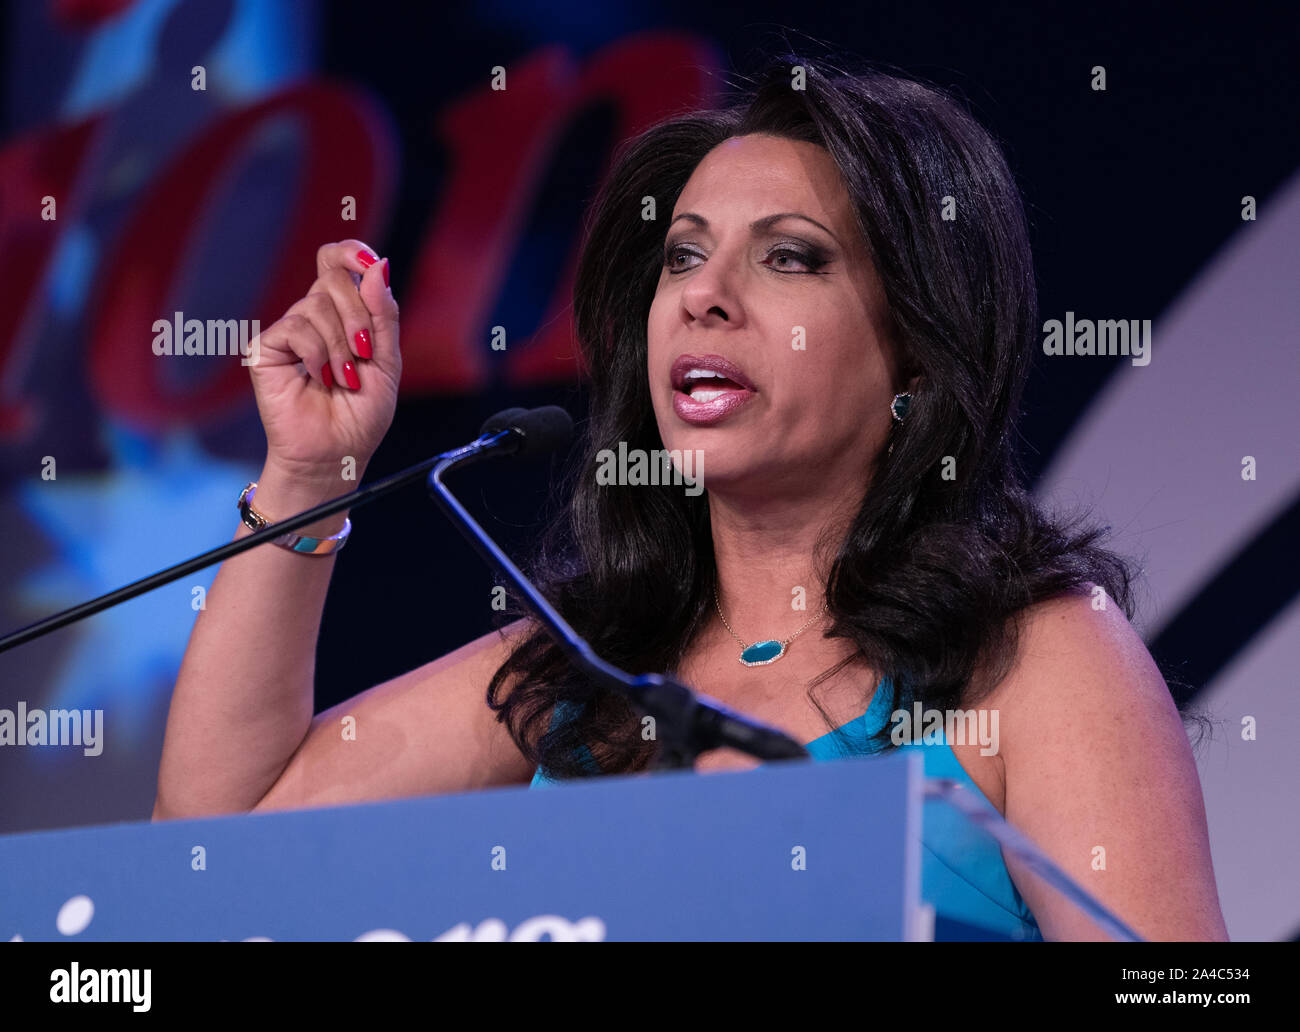 Washington, United States Of America. 12th Oct, 2019. Brigitte Gabriel, Founder and President of the anti-Islam group Act for America, speaks at the Values Voter Summit, a conference of Christian religious and social conservatives at the Omni Shoreham Hotel in Washington, DC on Saturday, October 12, 2019. The Values Voter Summit is produced and hosted by FRC Action, the political arm of the Family Research Council. (Photo by Jeff Malet) Photo via Credit: Newscom/Alamy Live News Stock Photo